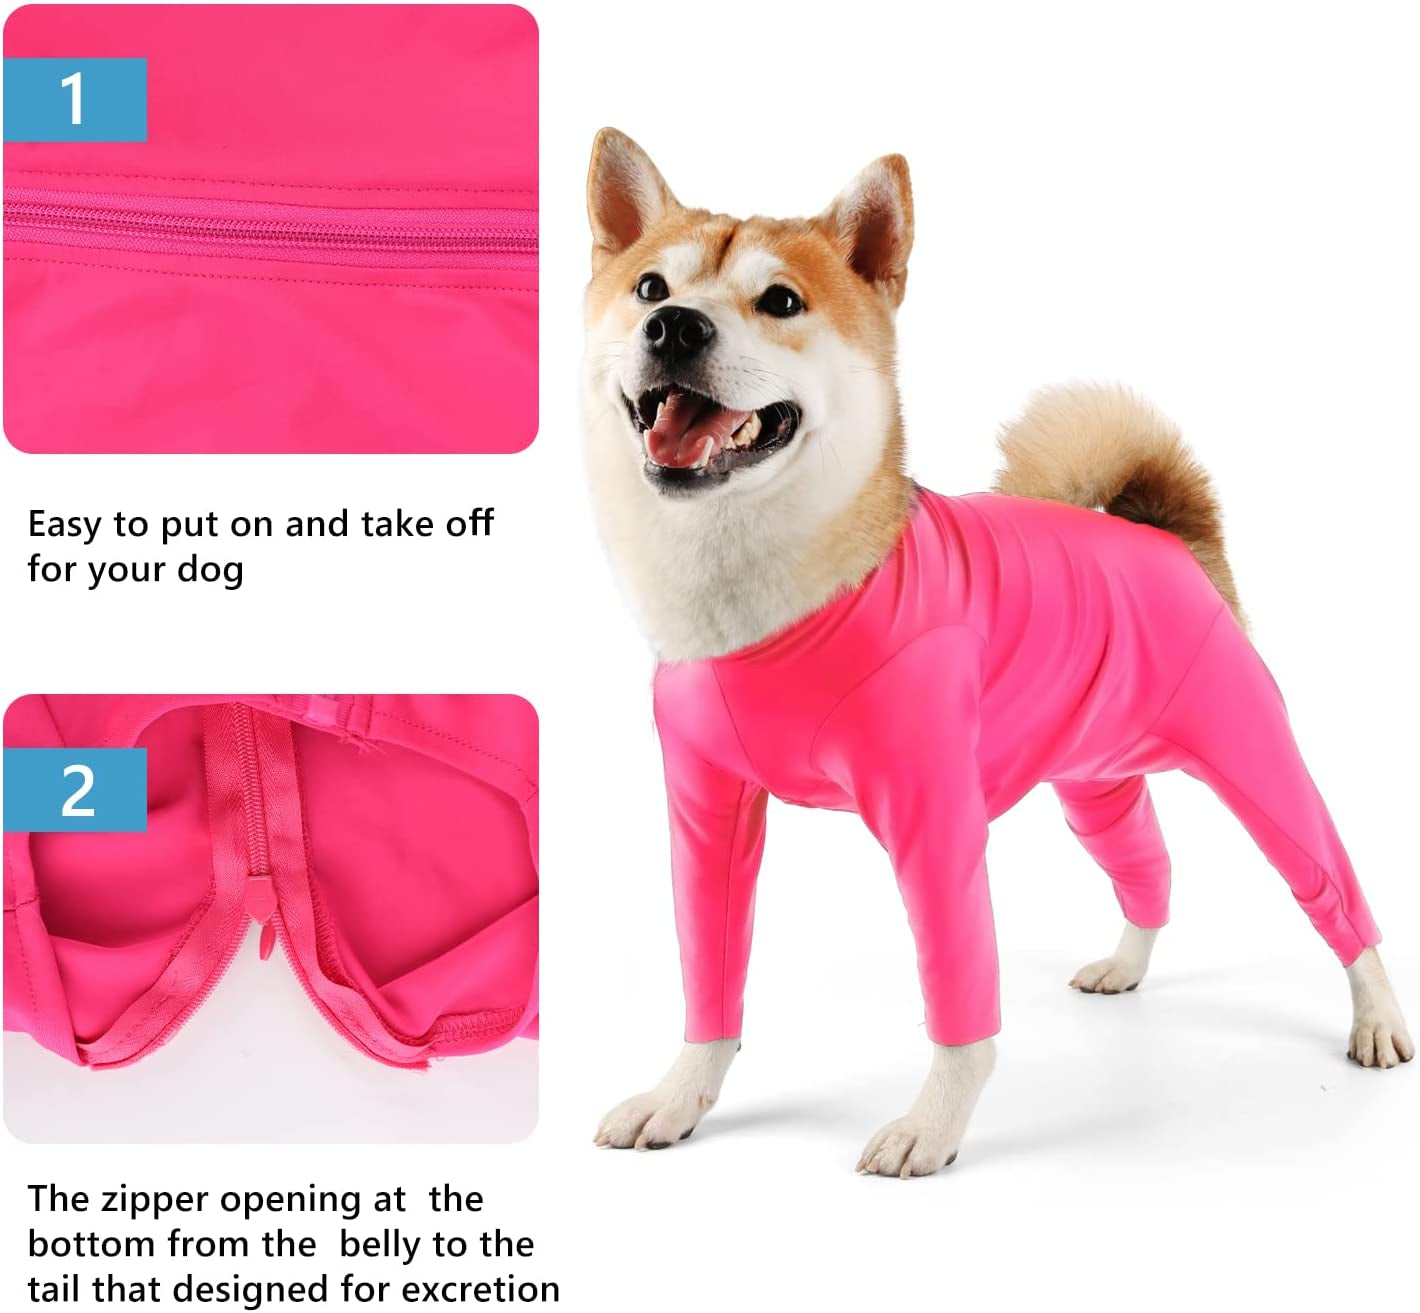 AOKAZI Dog Surgery Recovery Suit, Puppy Cat Onesie for Shedding